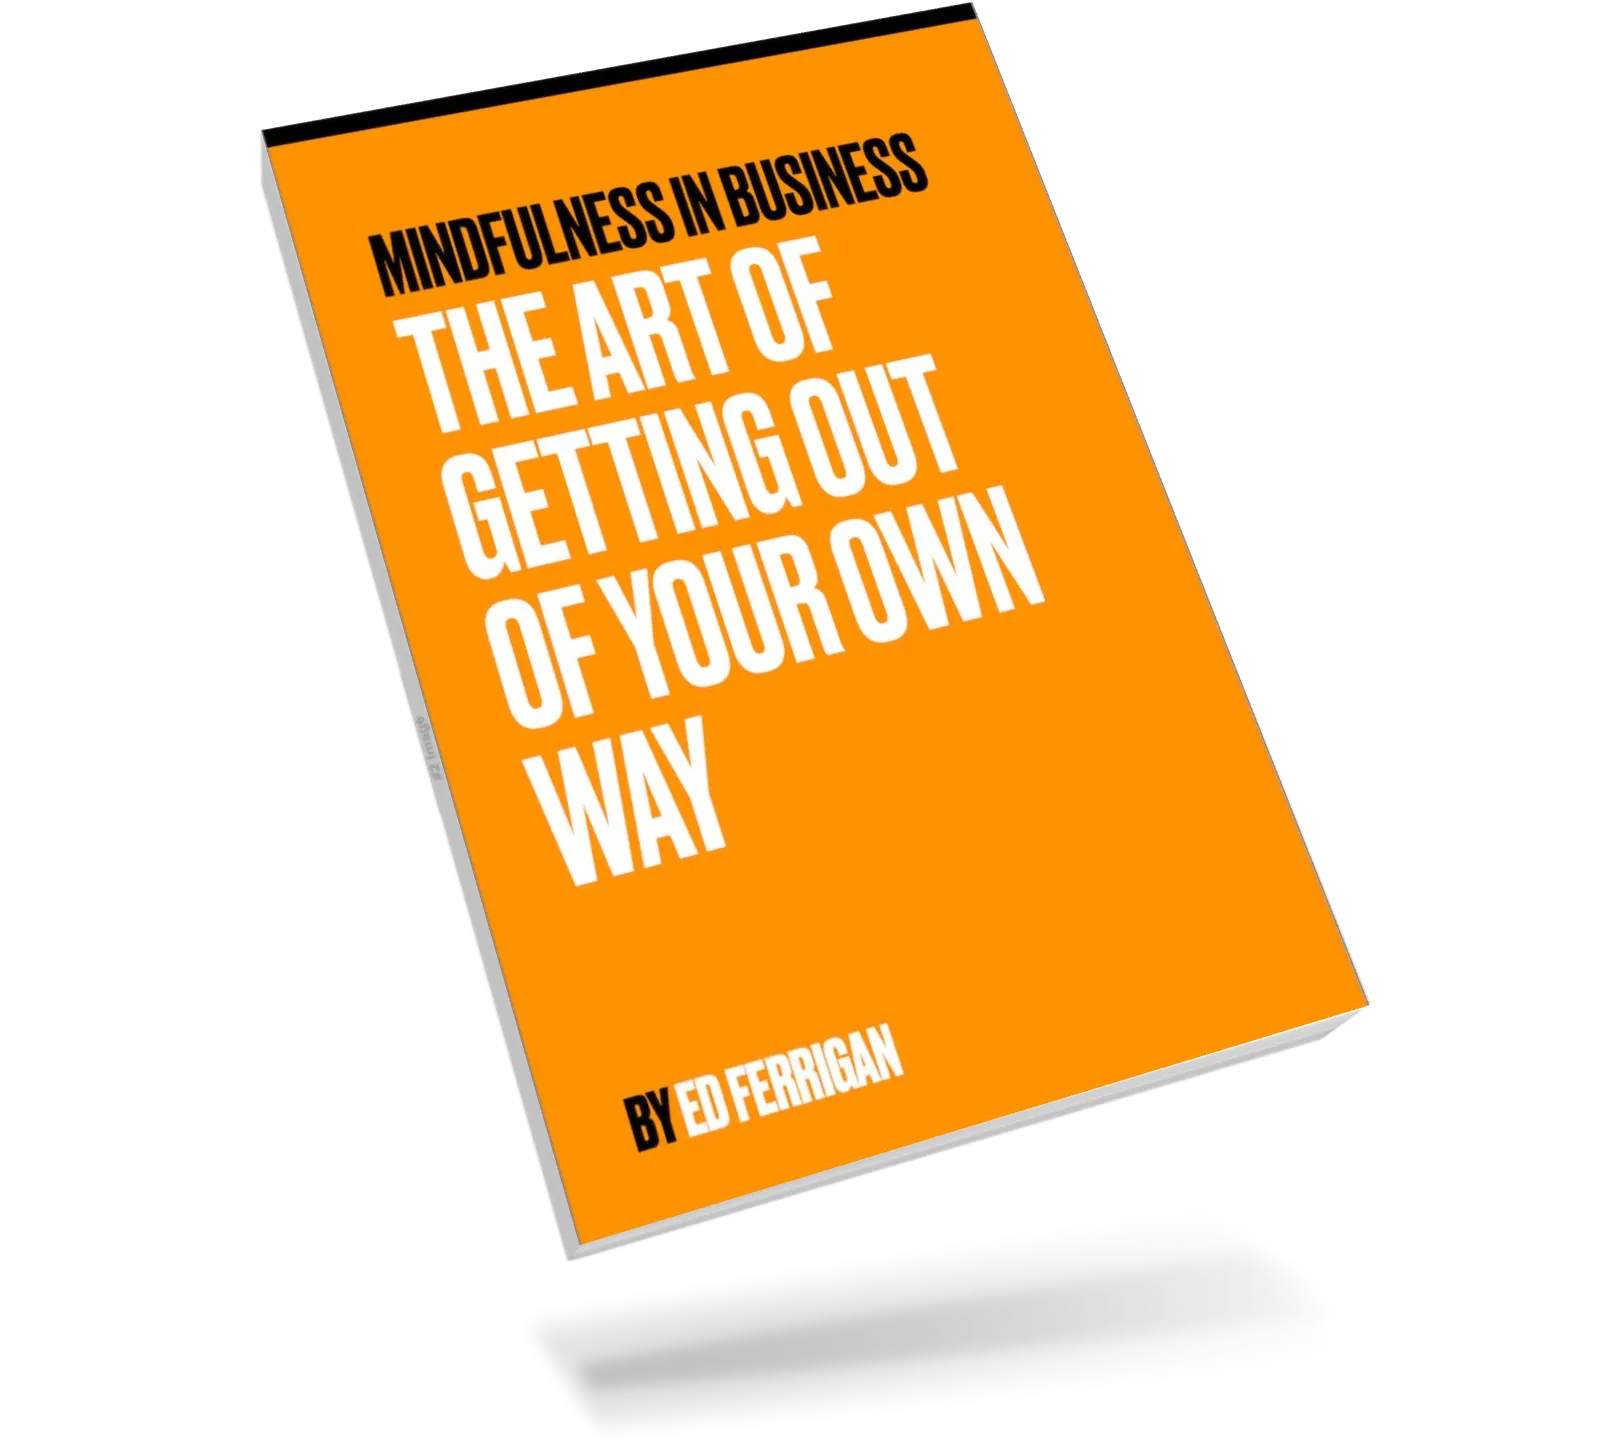 image for the art of getting out of your own way